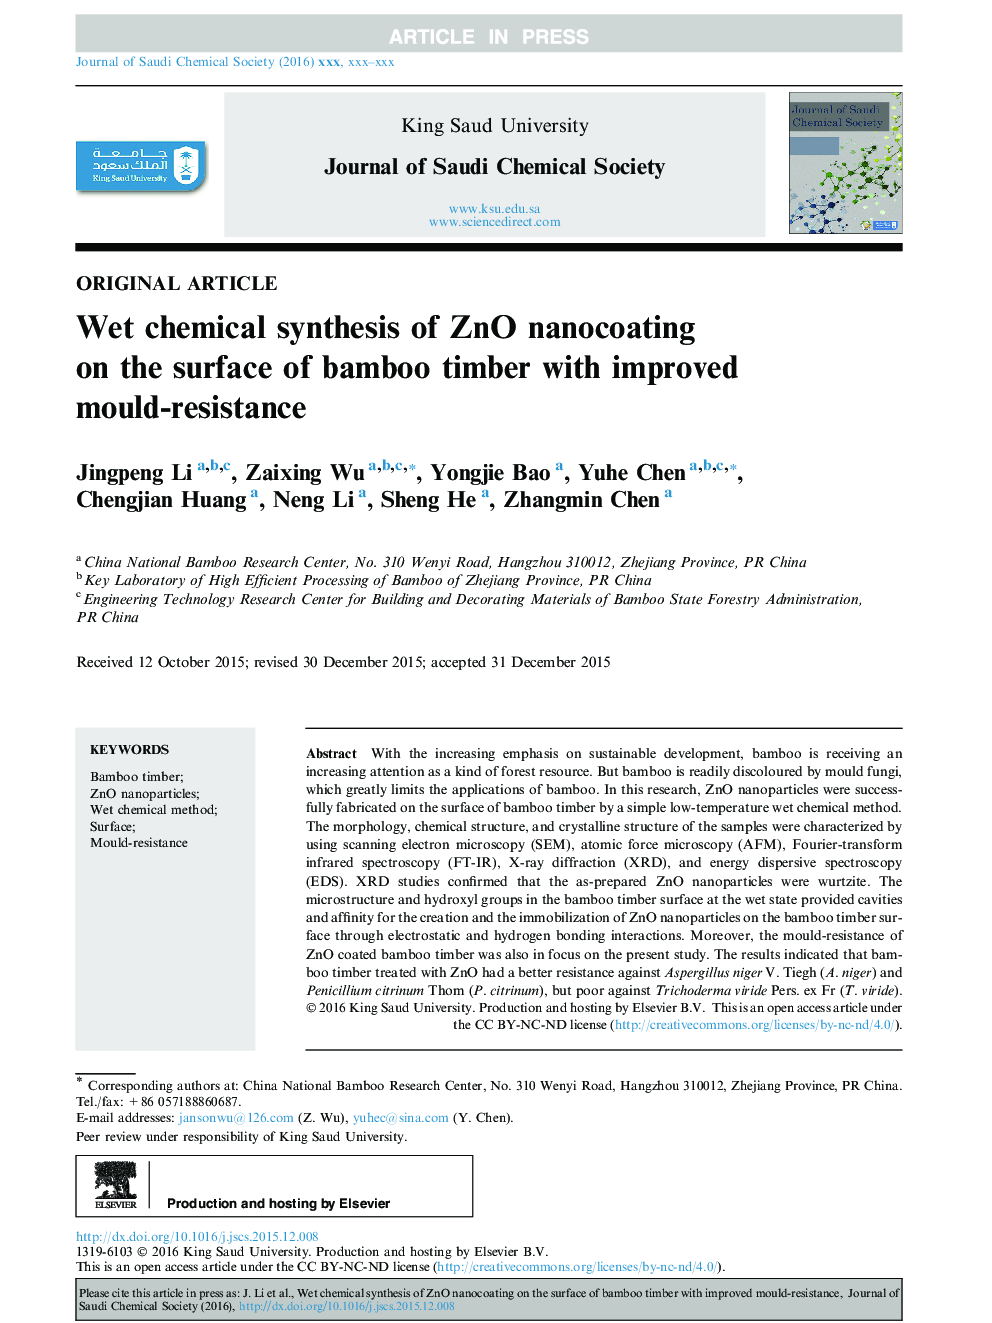 Wet chemical synthesis of ZnO nanocoating on the surface of bamboo timber with improved mould-resistance